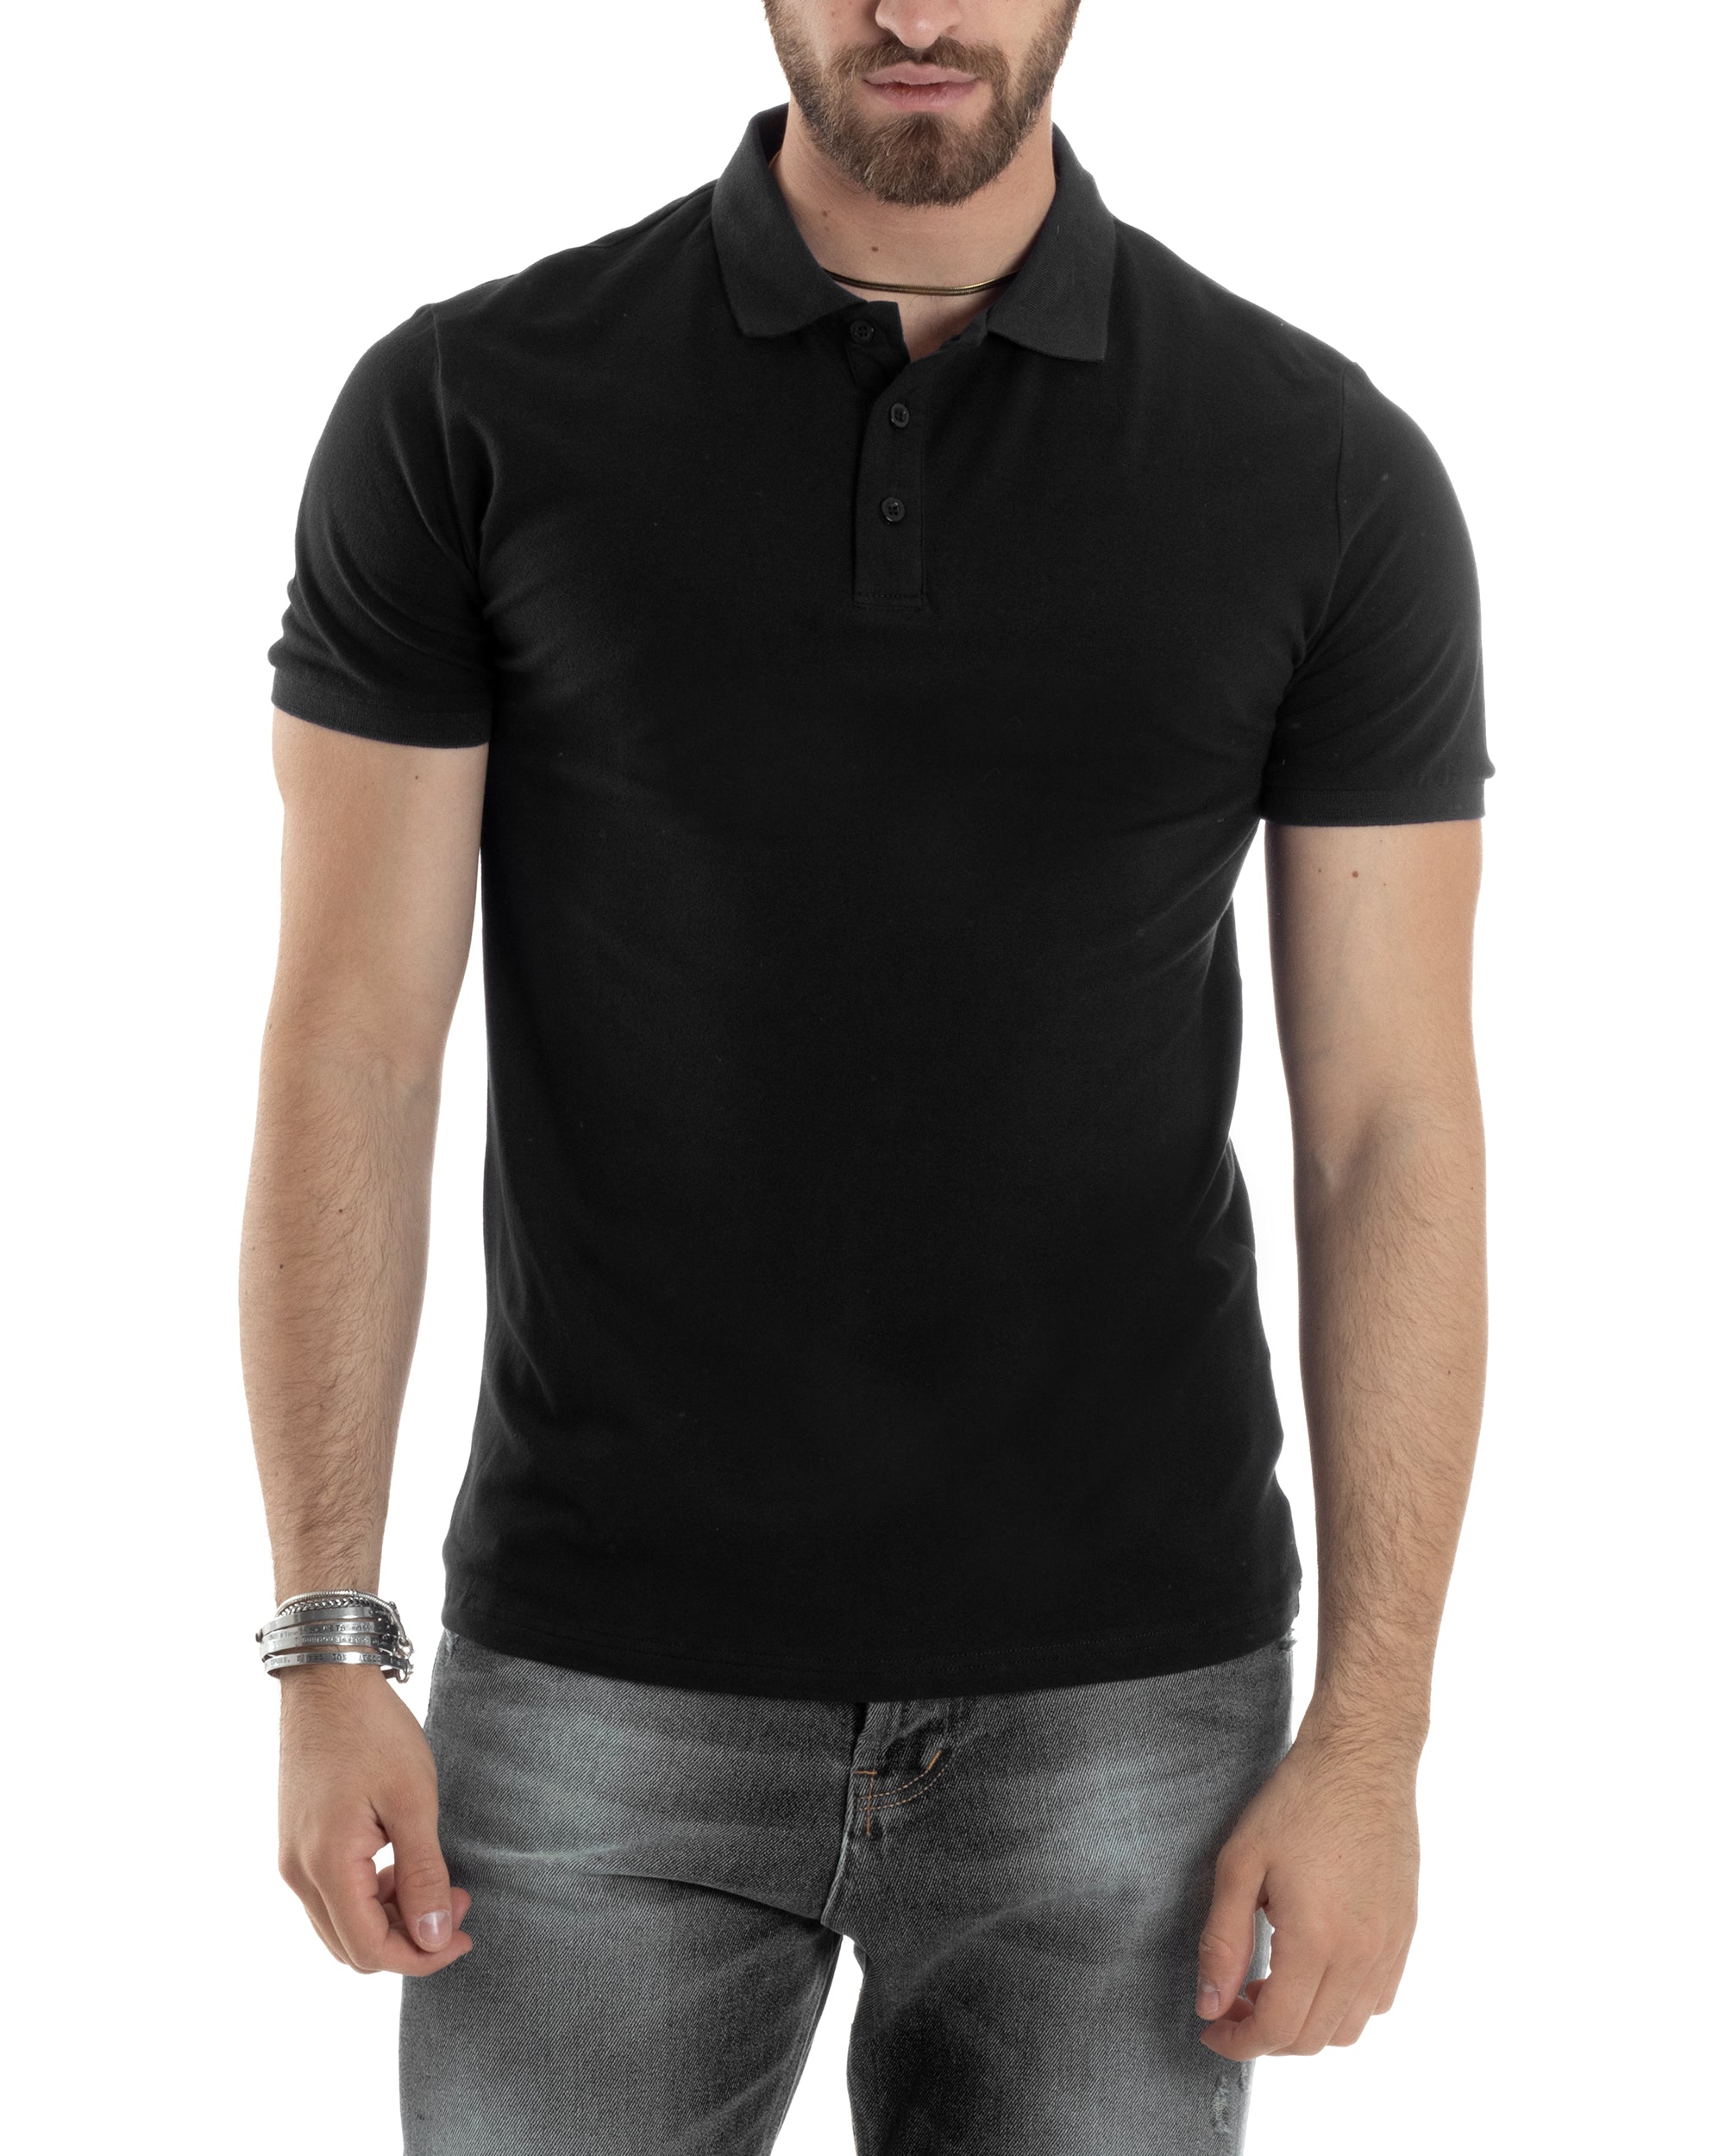 Men's T-shirt Polo Solid Color Black Short Sleeve Button Collar Basic Casual GIOSAL-TS2971A